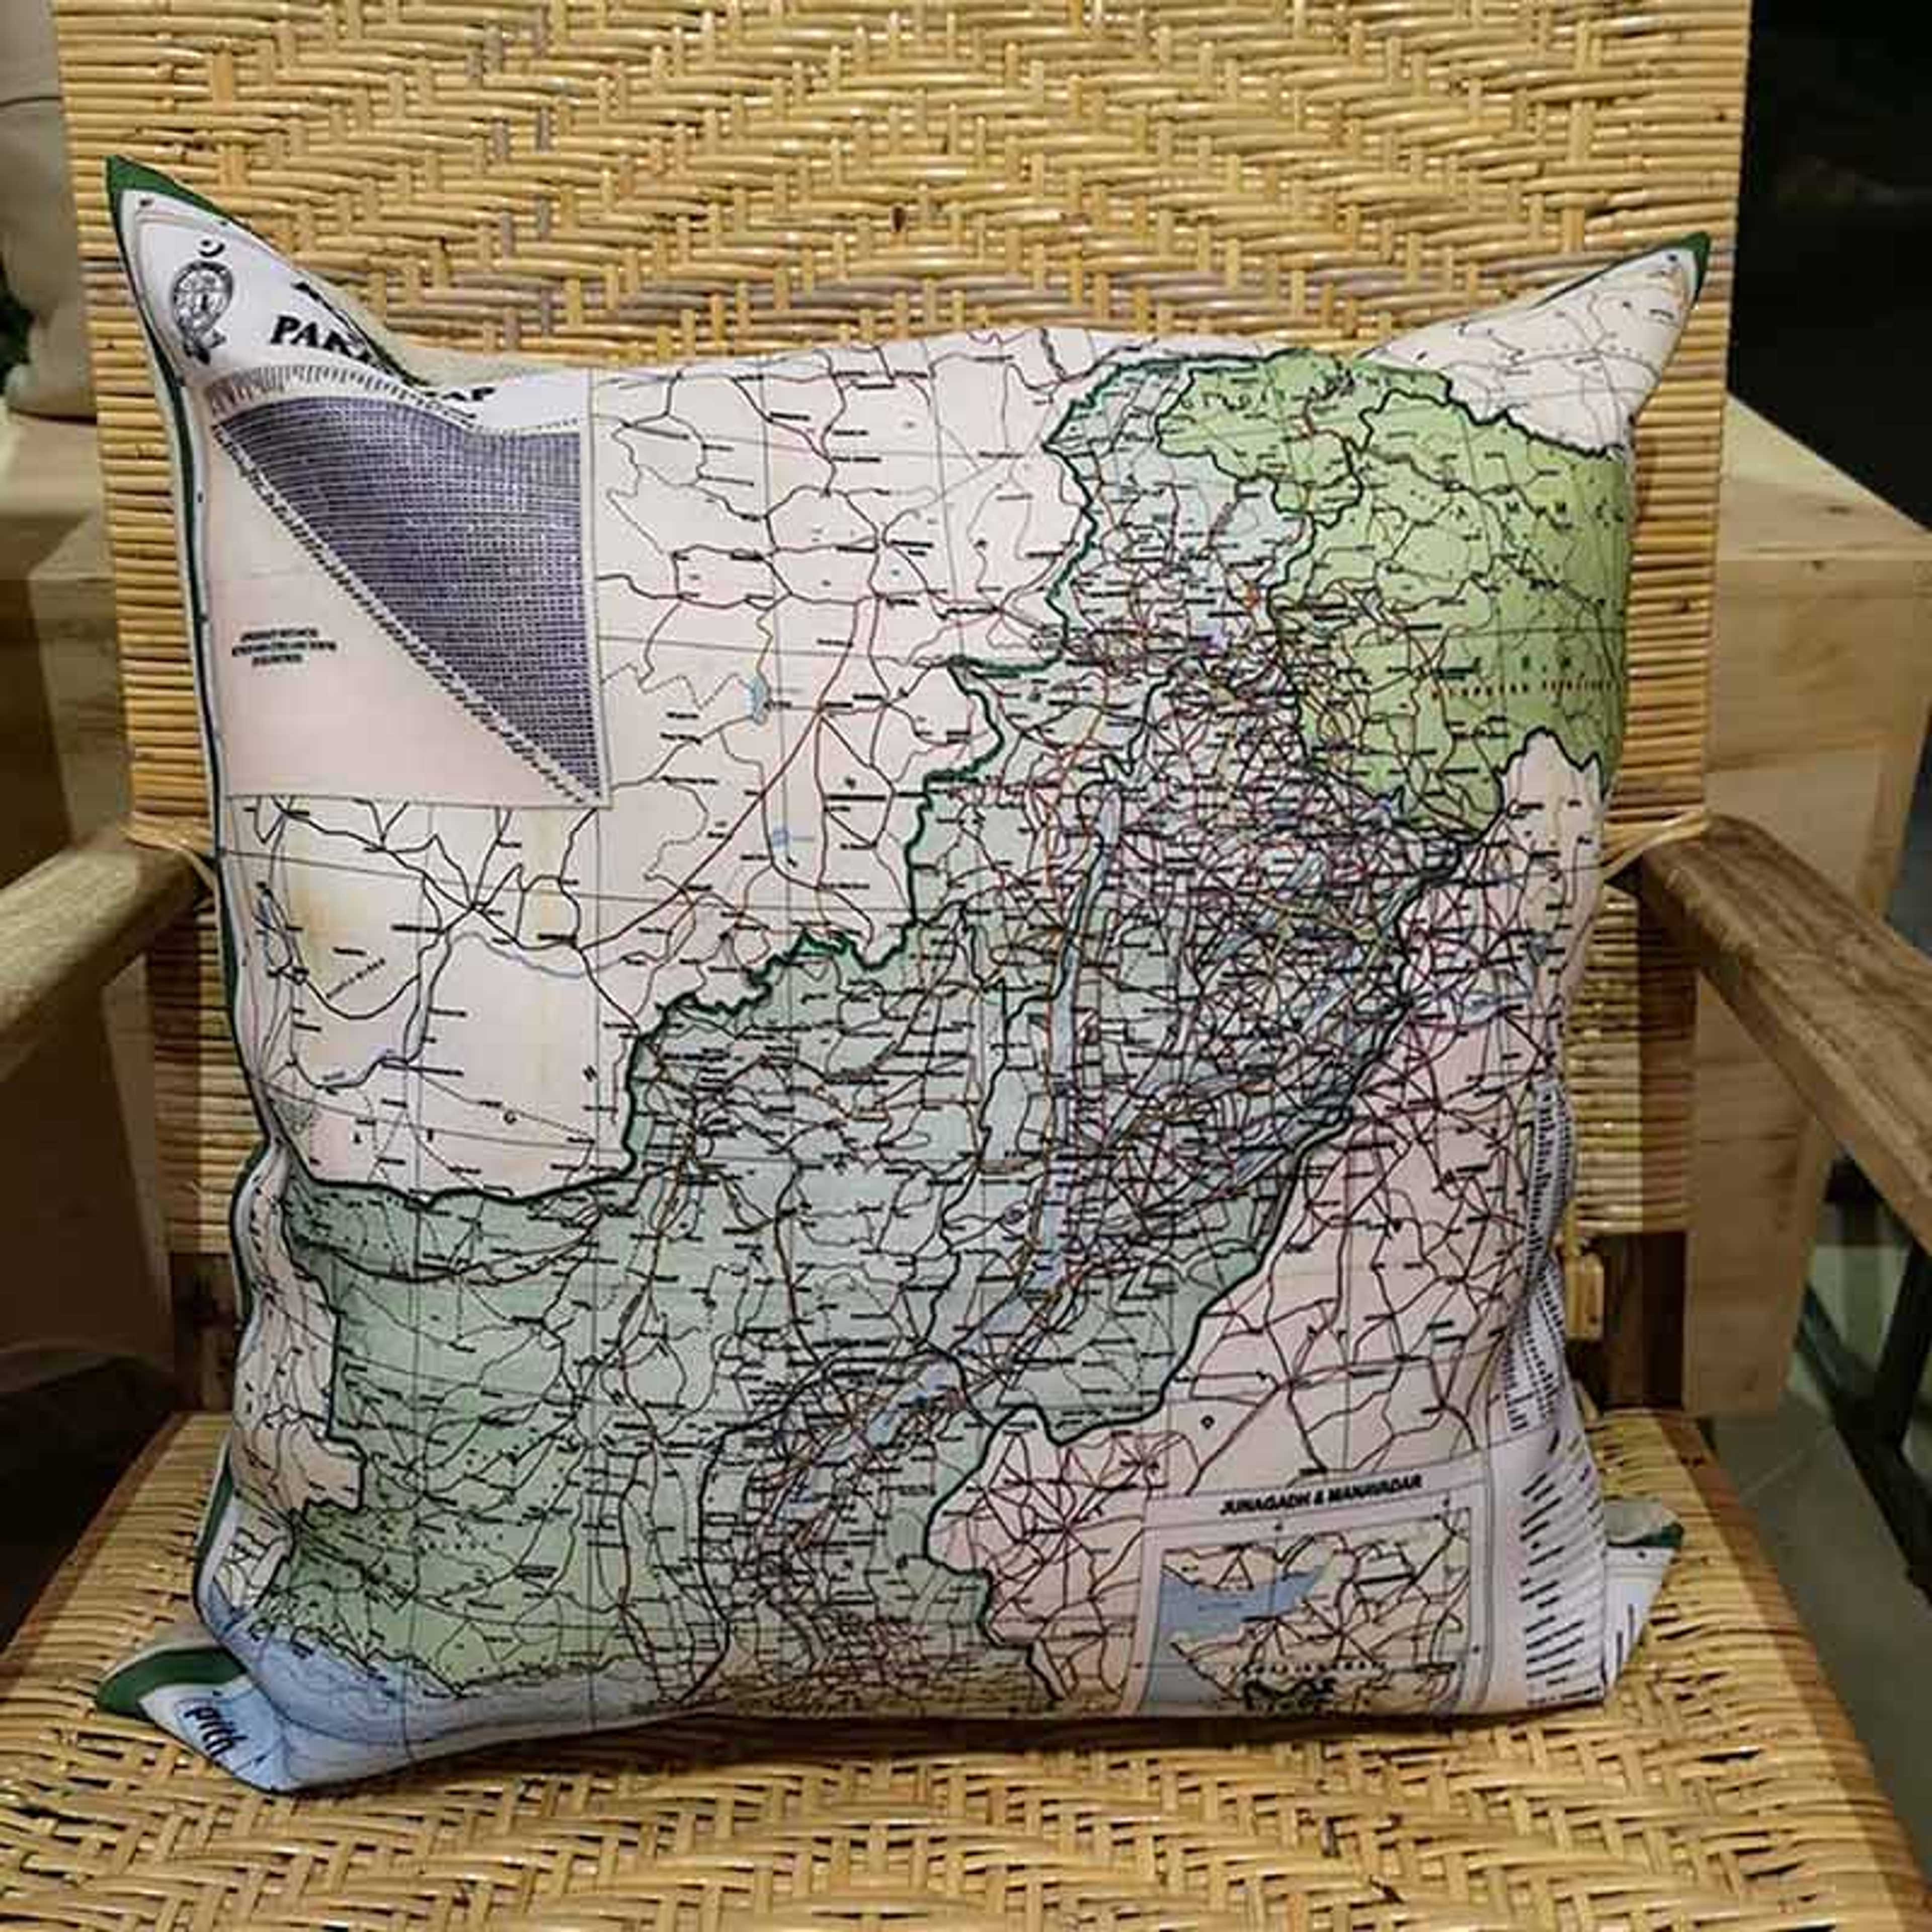 MAP OF PAKISTAN CUSHION COVER